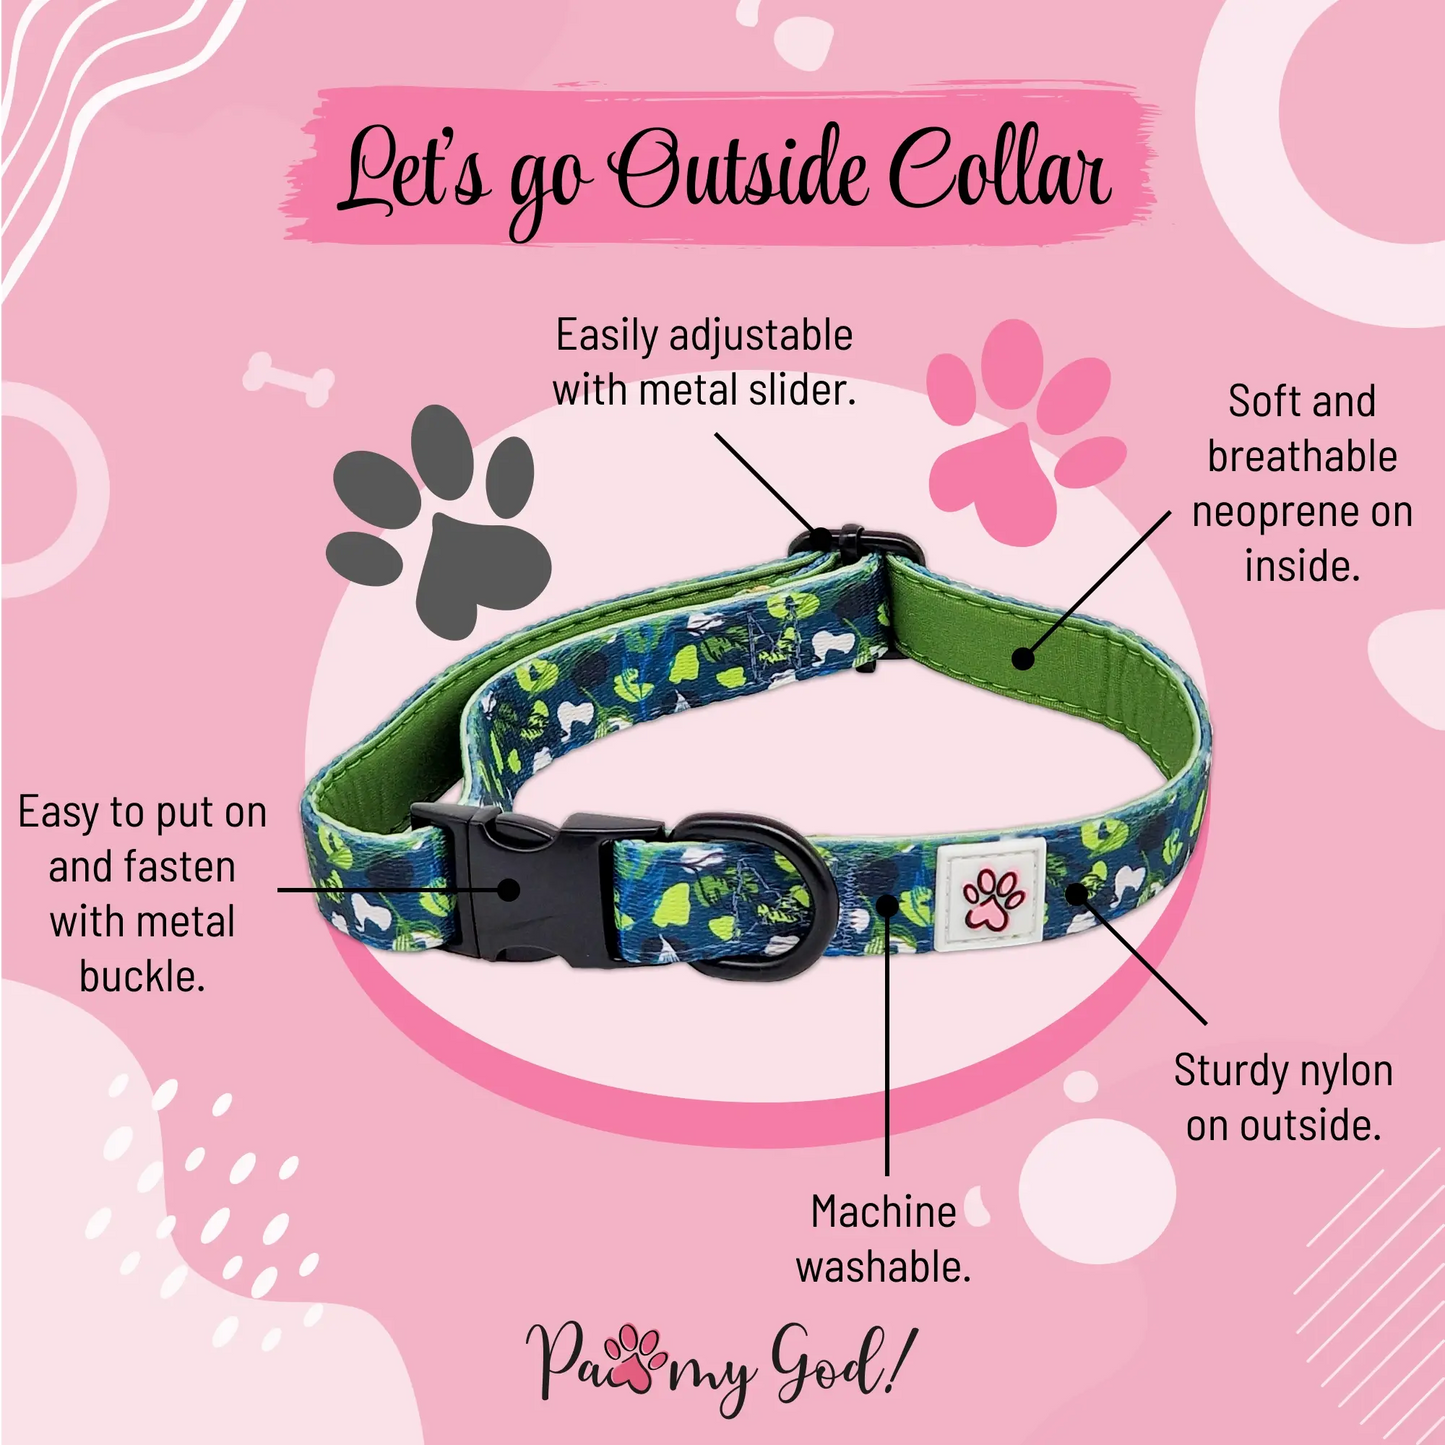 Let's go Outside Cloth Collar Features